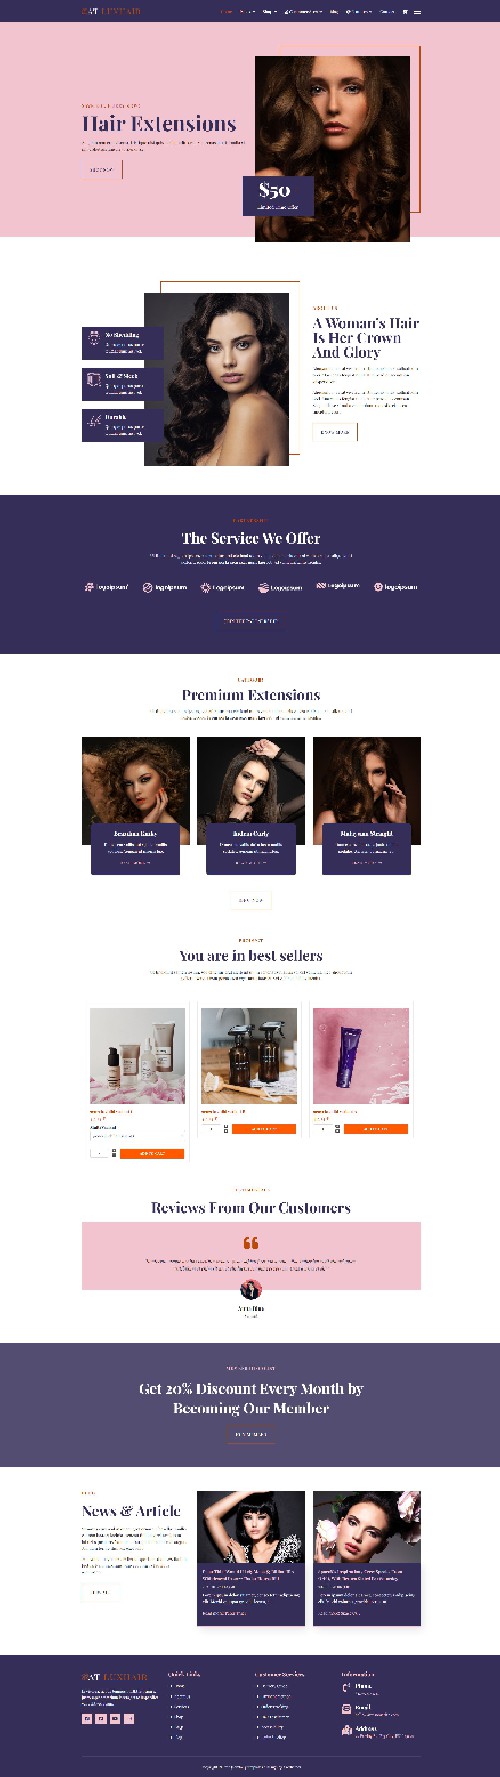 Luxhair - Joomla template for hairdressers, hair salons